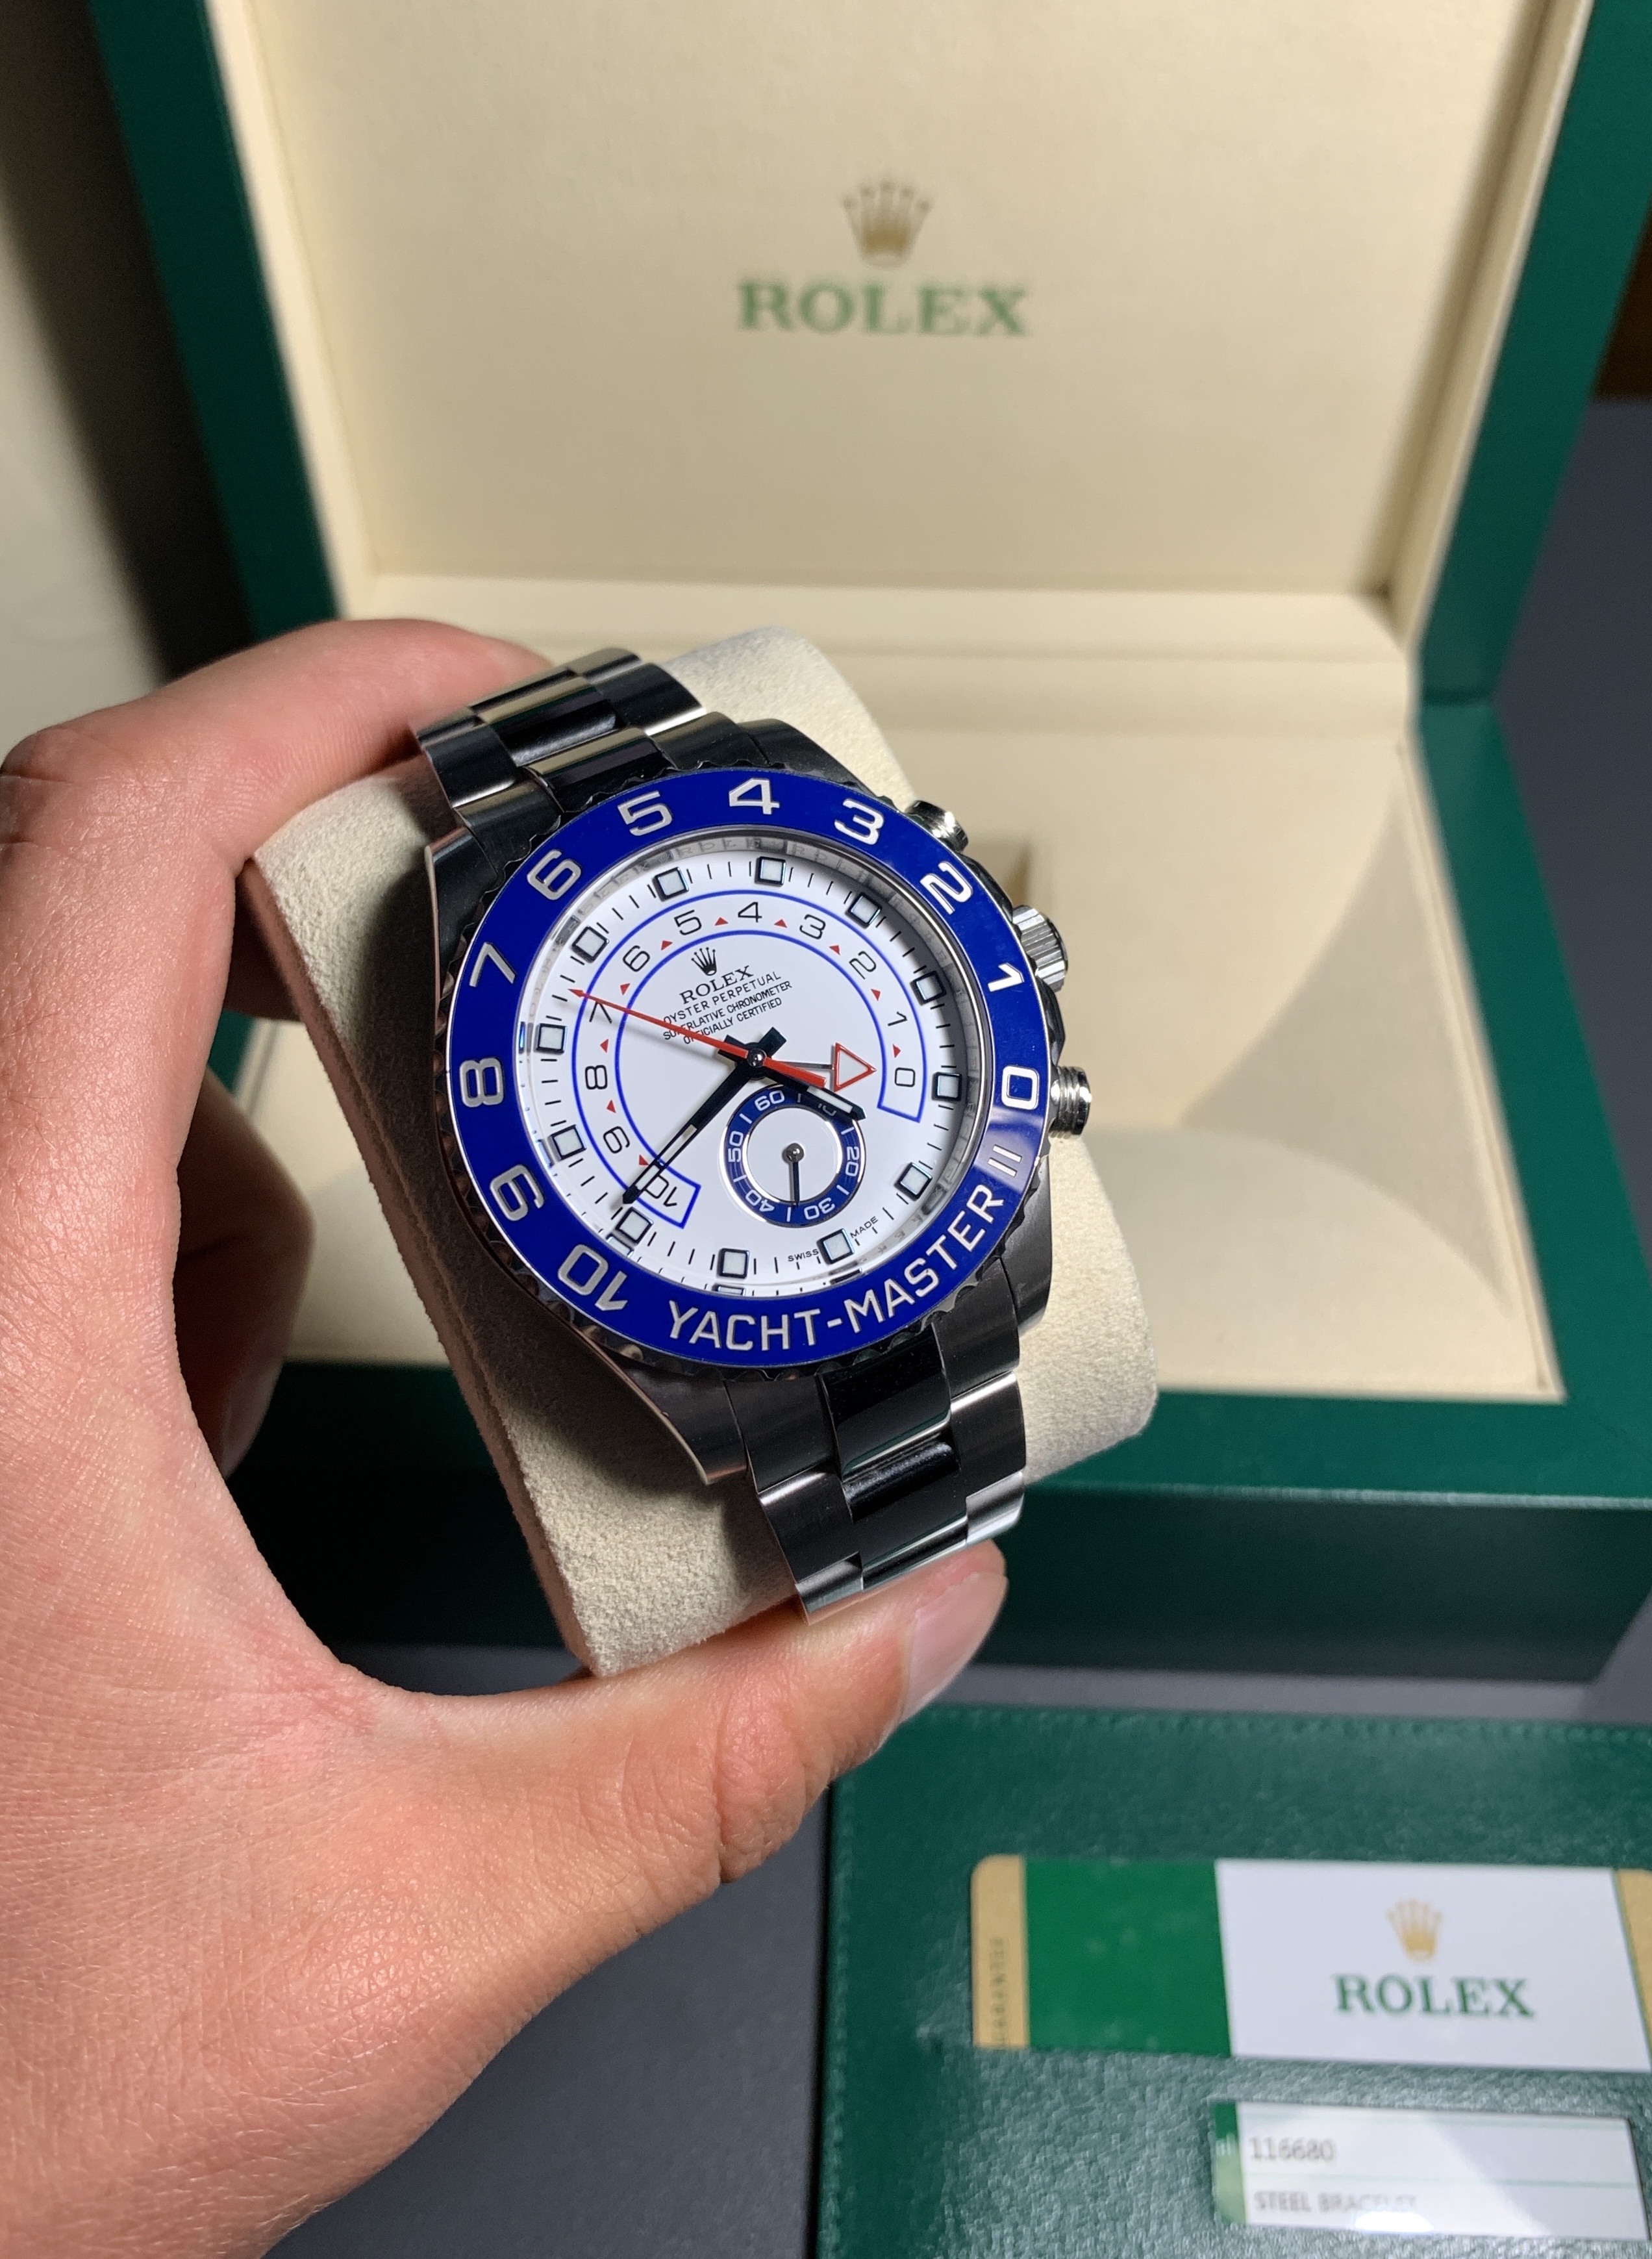 ROLEX YACHTMASTER II 116680 - Carr Watches